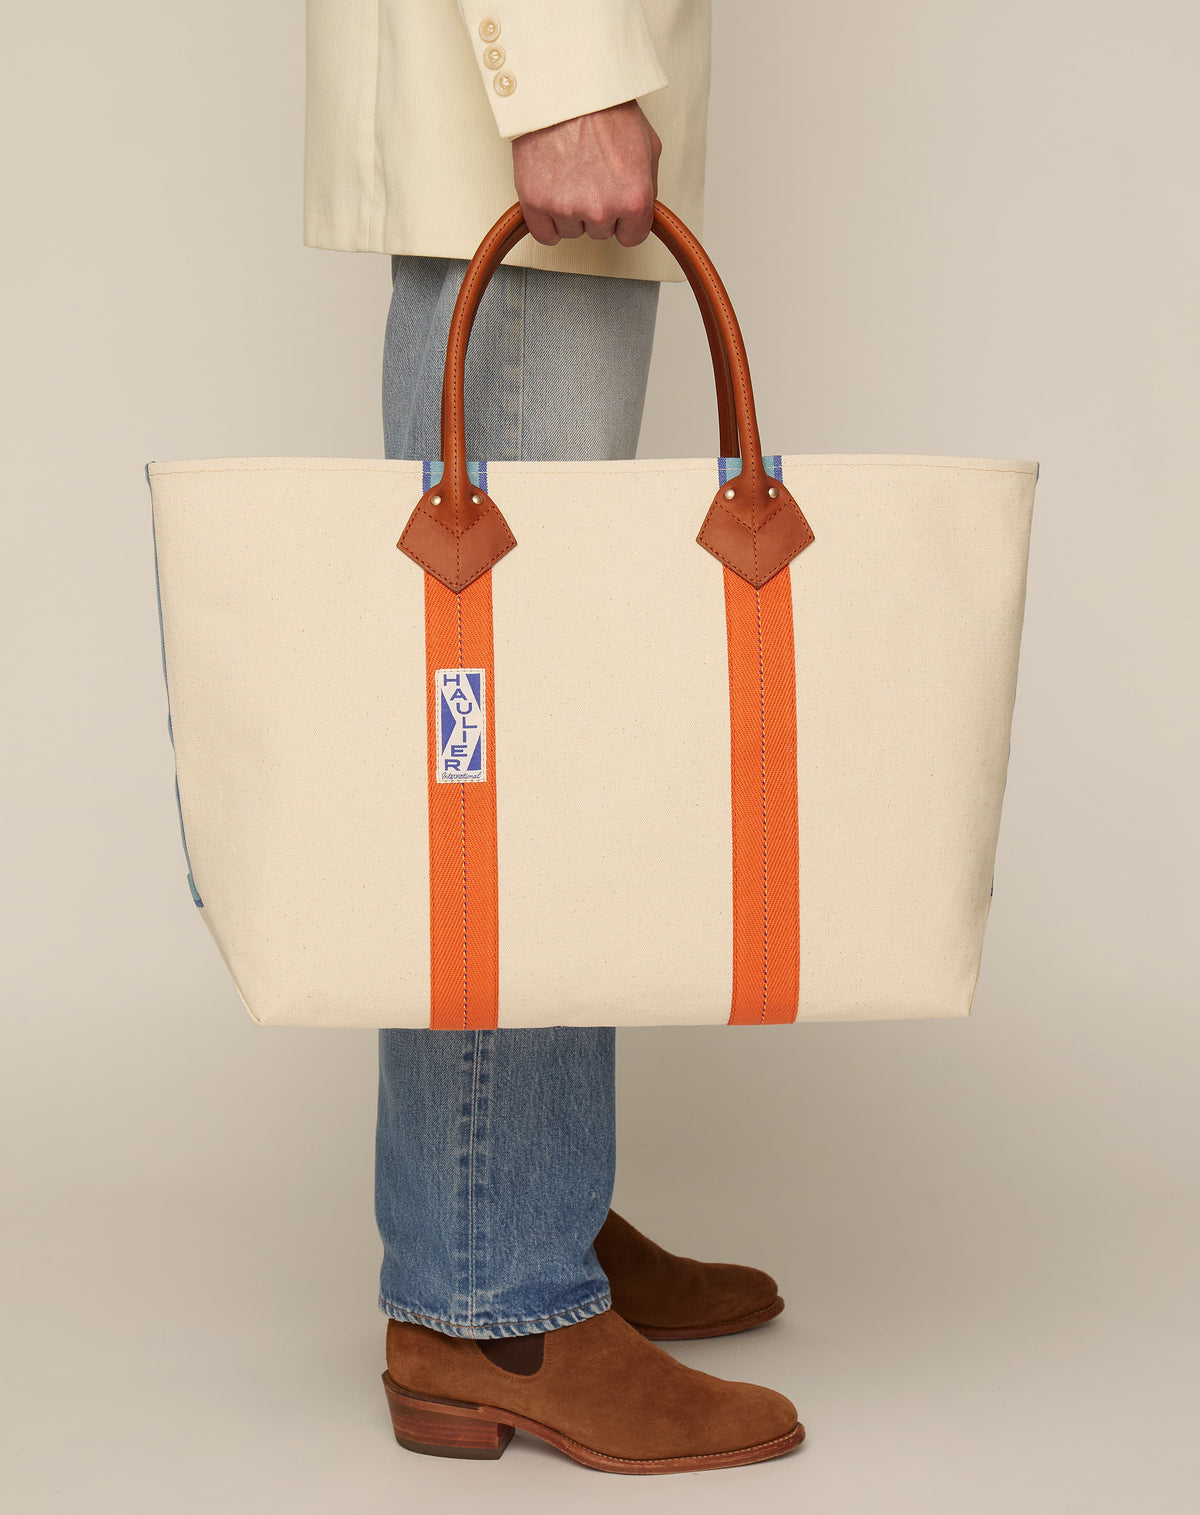 Image of man holding a classic canvas tote bag in natural ecru colour with leather handles and contrasting orange stripes.